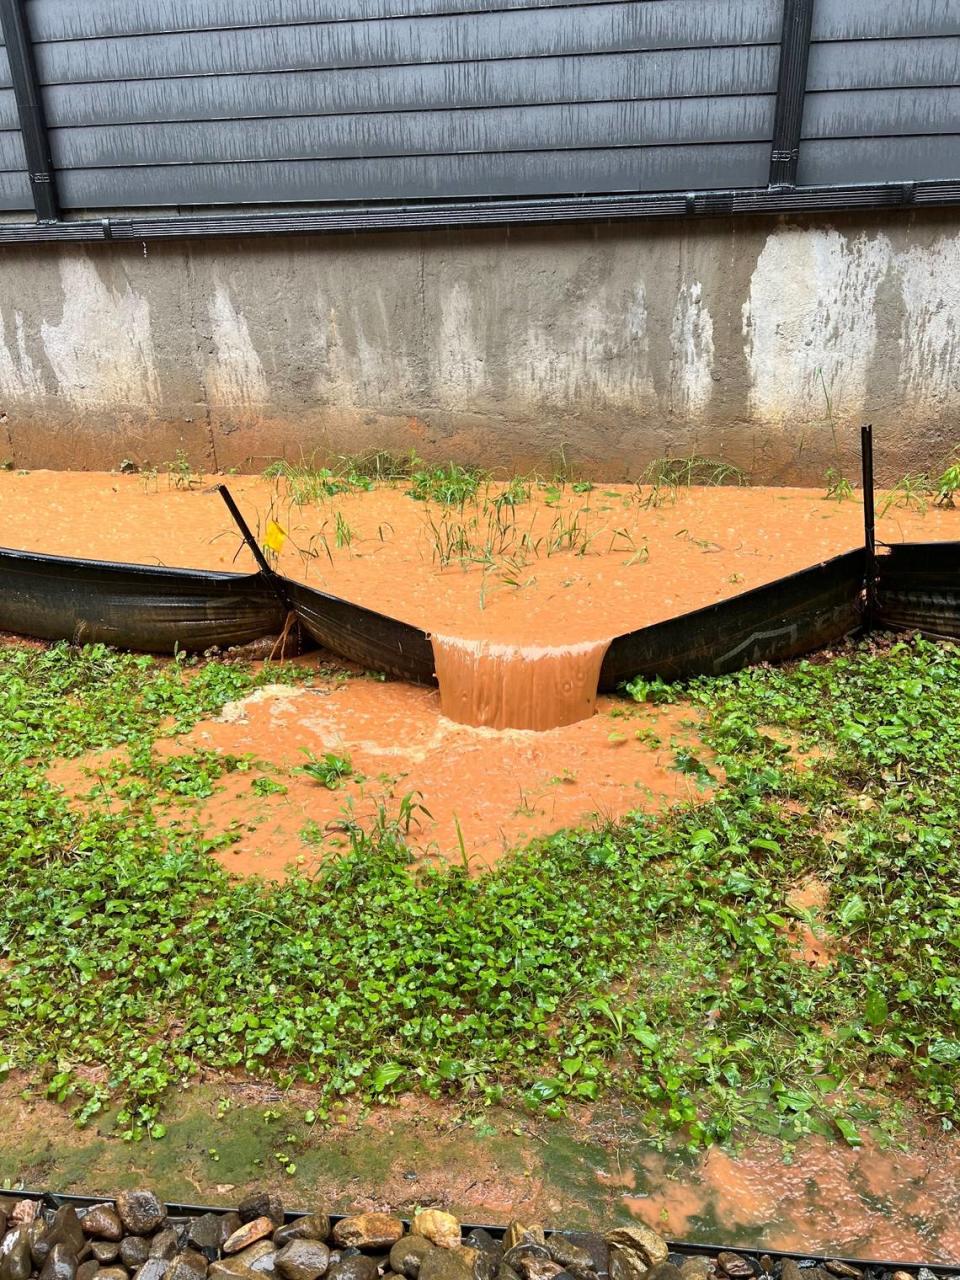 Water spills over a barrier installed to help prevent erosion along Coxe Avenue in Charlotte.